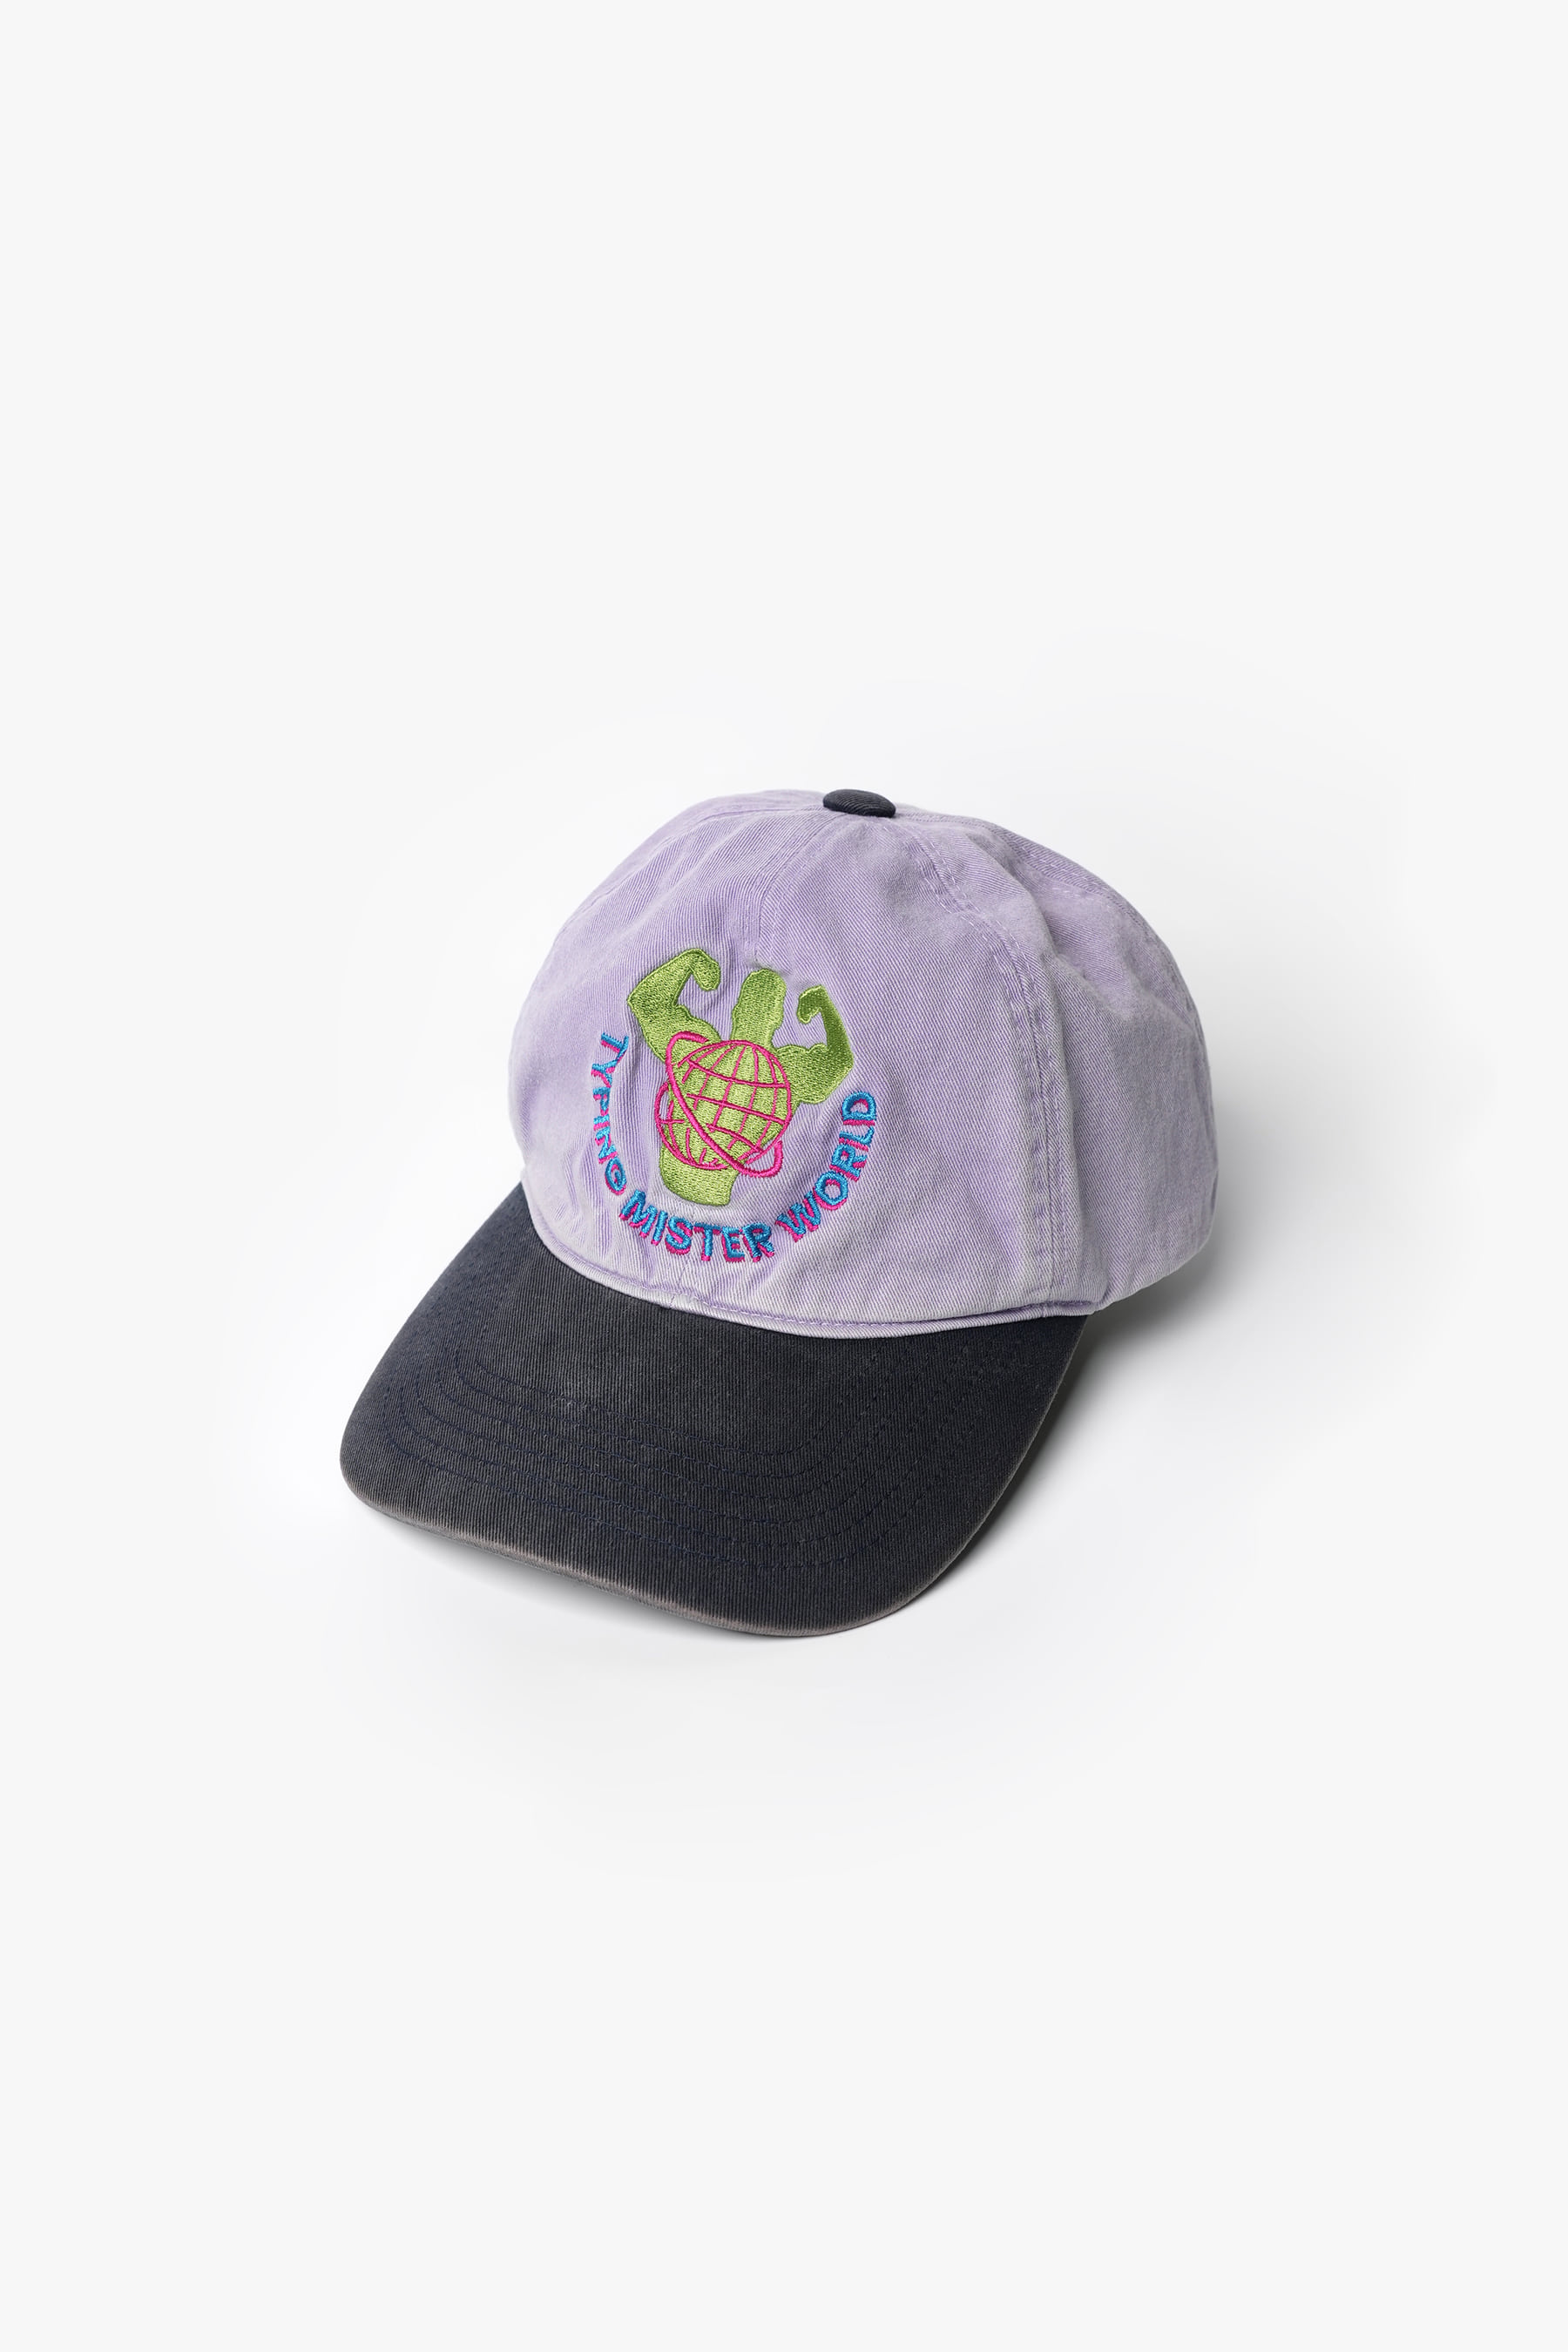 DUSTY LAVENDER/NAVY 80-90’S VNTG CAP (1990’S 1MUSCULAR GRAPHIC PARODY)